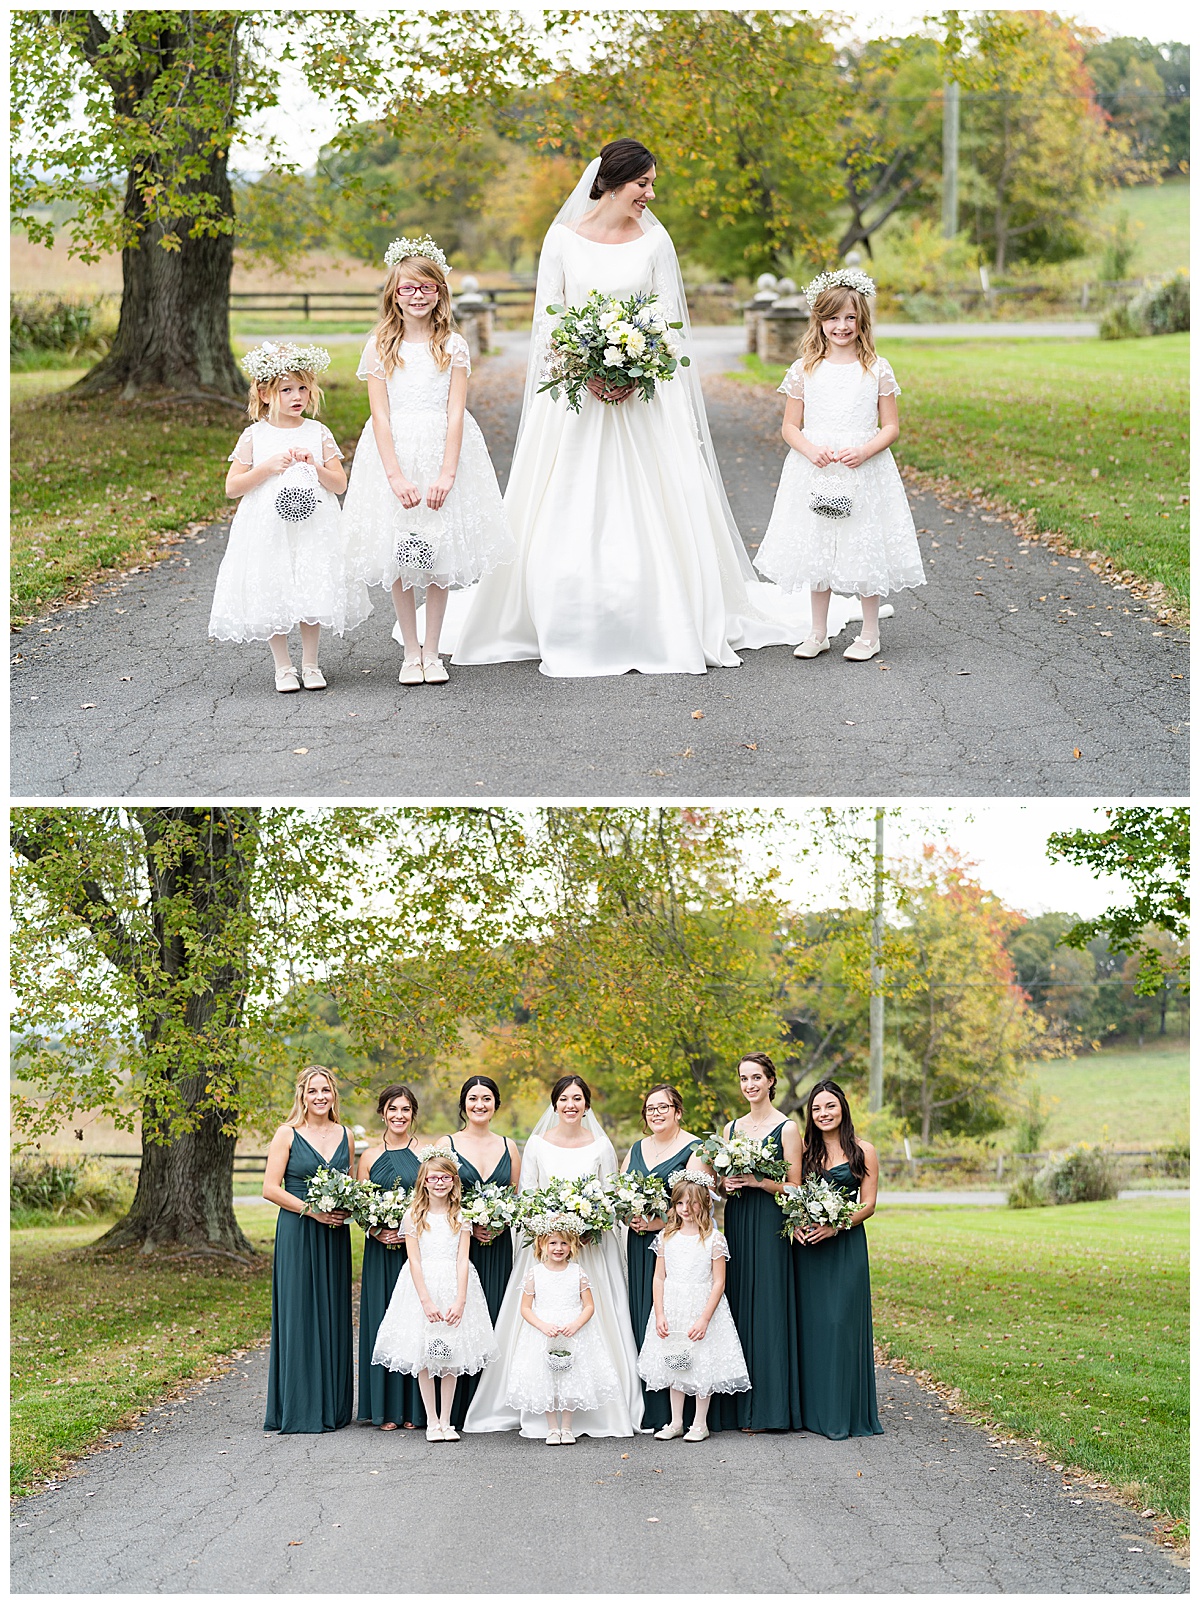 Stefanie Kamerman Photography - A Hunter Green and White Themed Wedding - Manor at Airmont - Round Hill, Virginia_0031.jpg